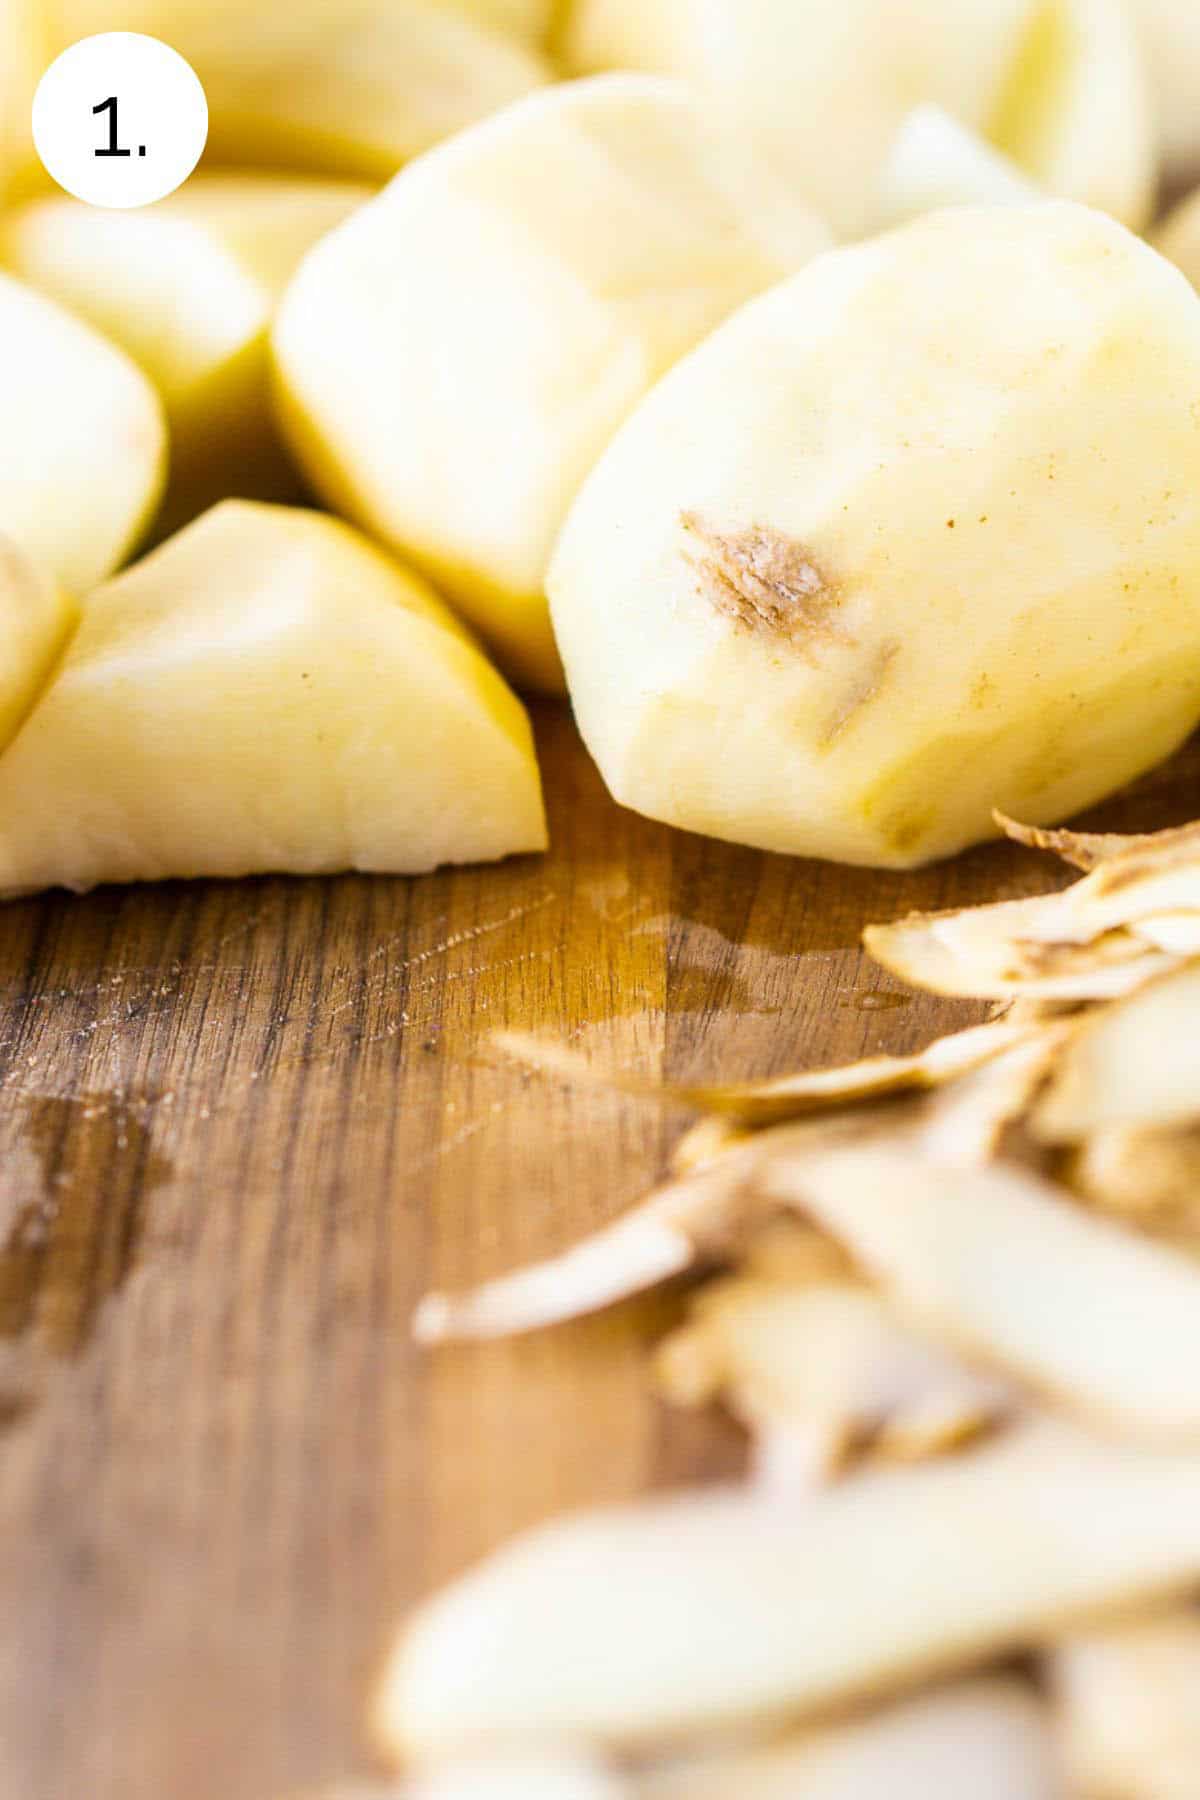 The russet potatoes peeled on a wooden cutting board before boiling and simmering.